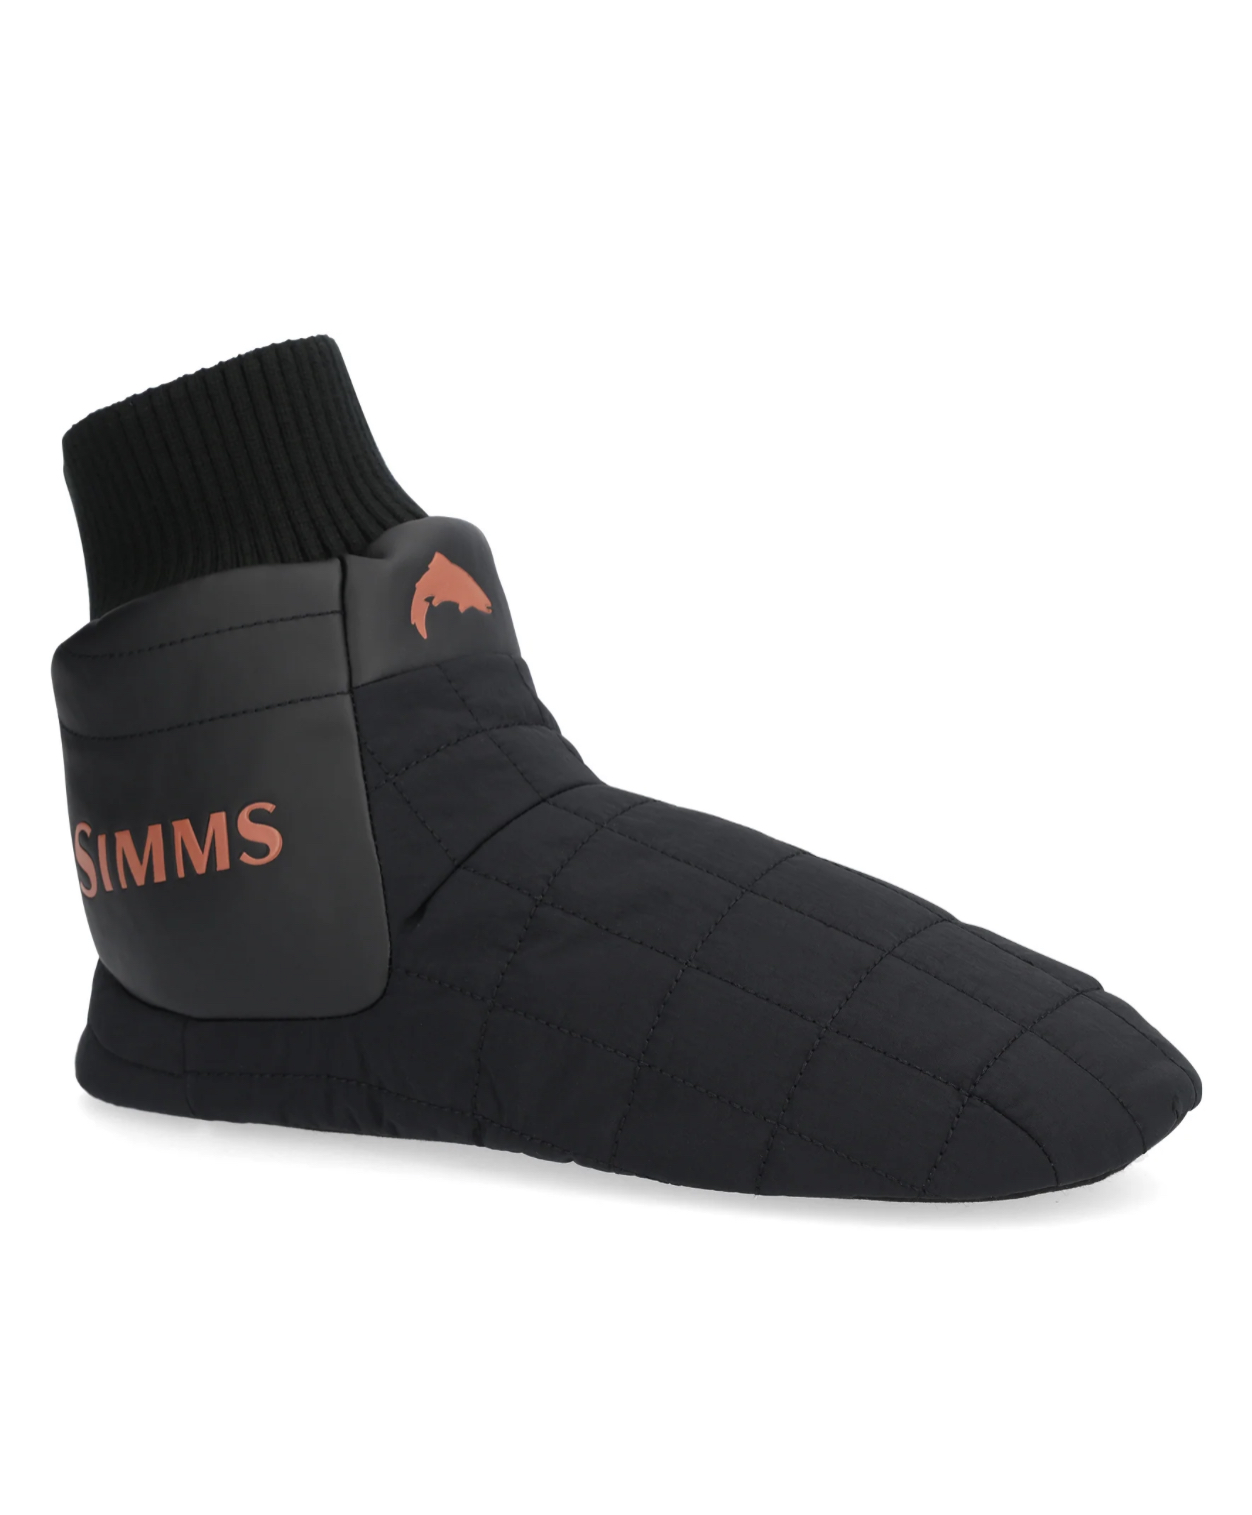 Simms Bulkley Insulated Bootie - Large